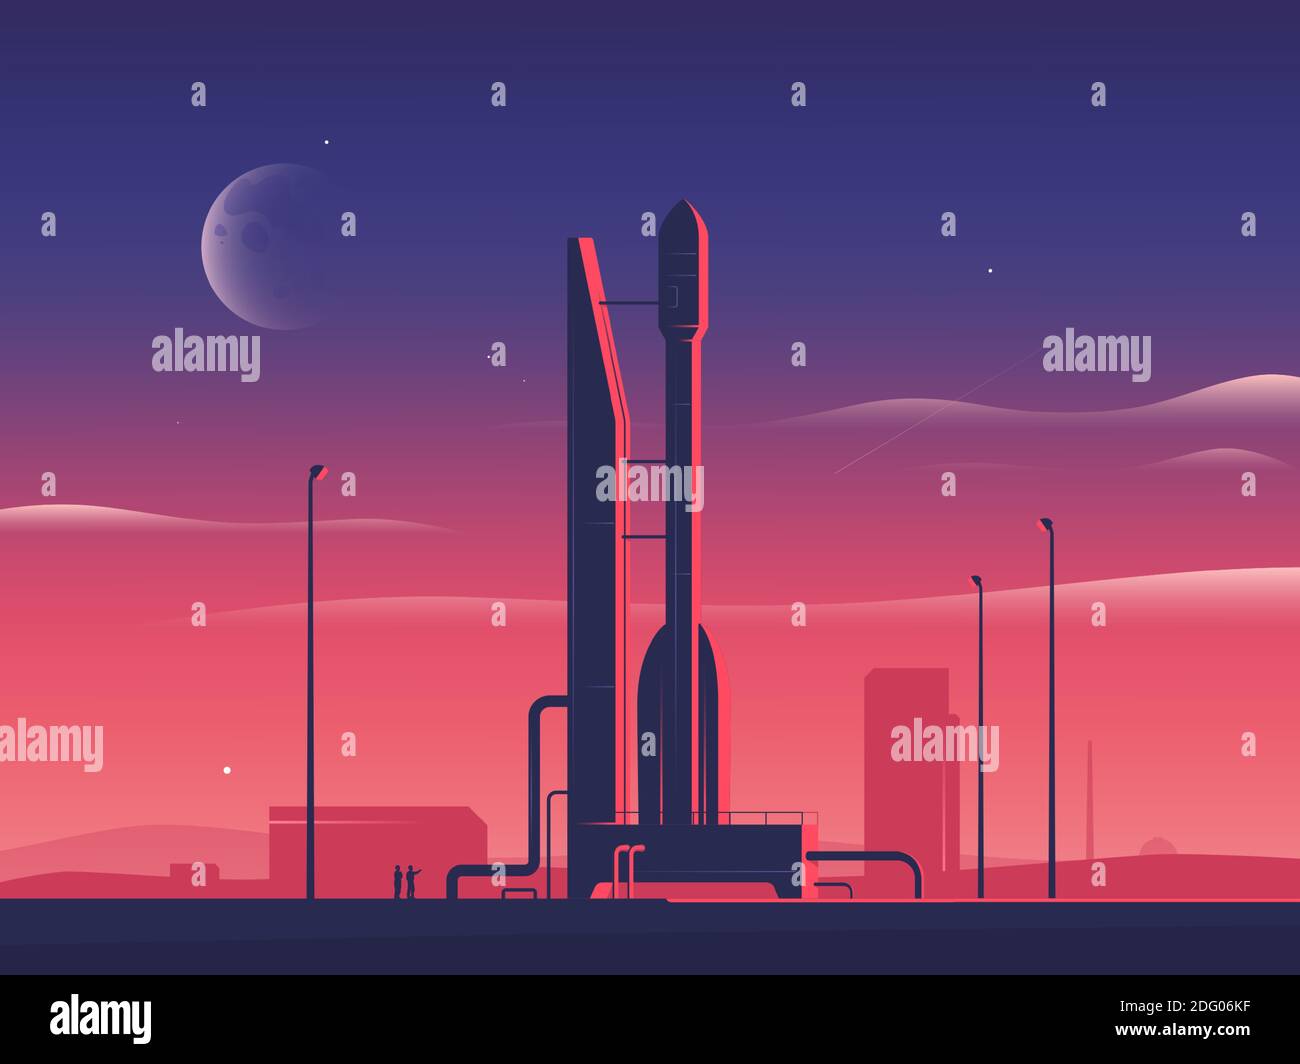 Vector illustration of a rocket spaceship at sunset preparing for launch Stock Vector